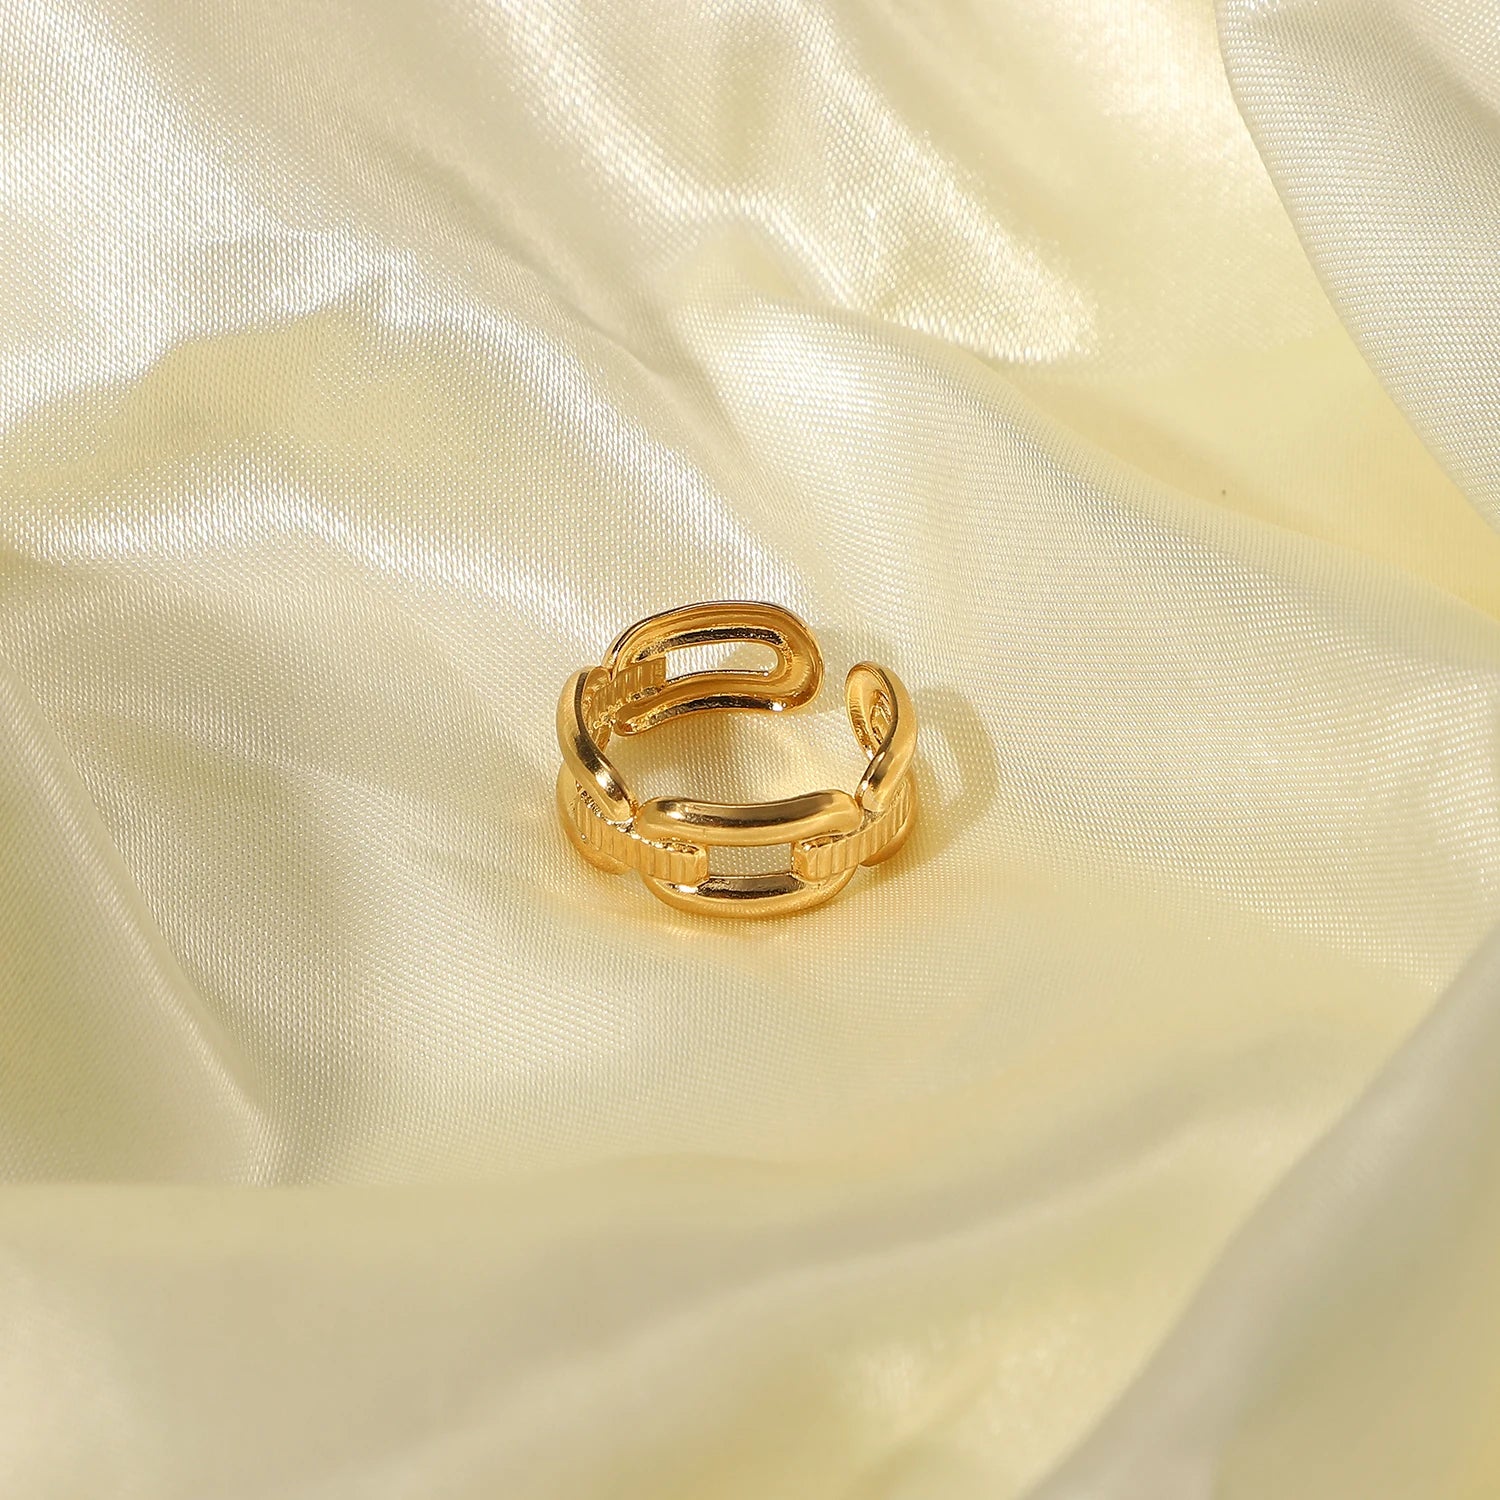 Adjustable Minimalist Rings 18K Gold Plated For Women on the screen